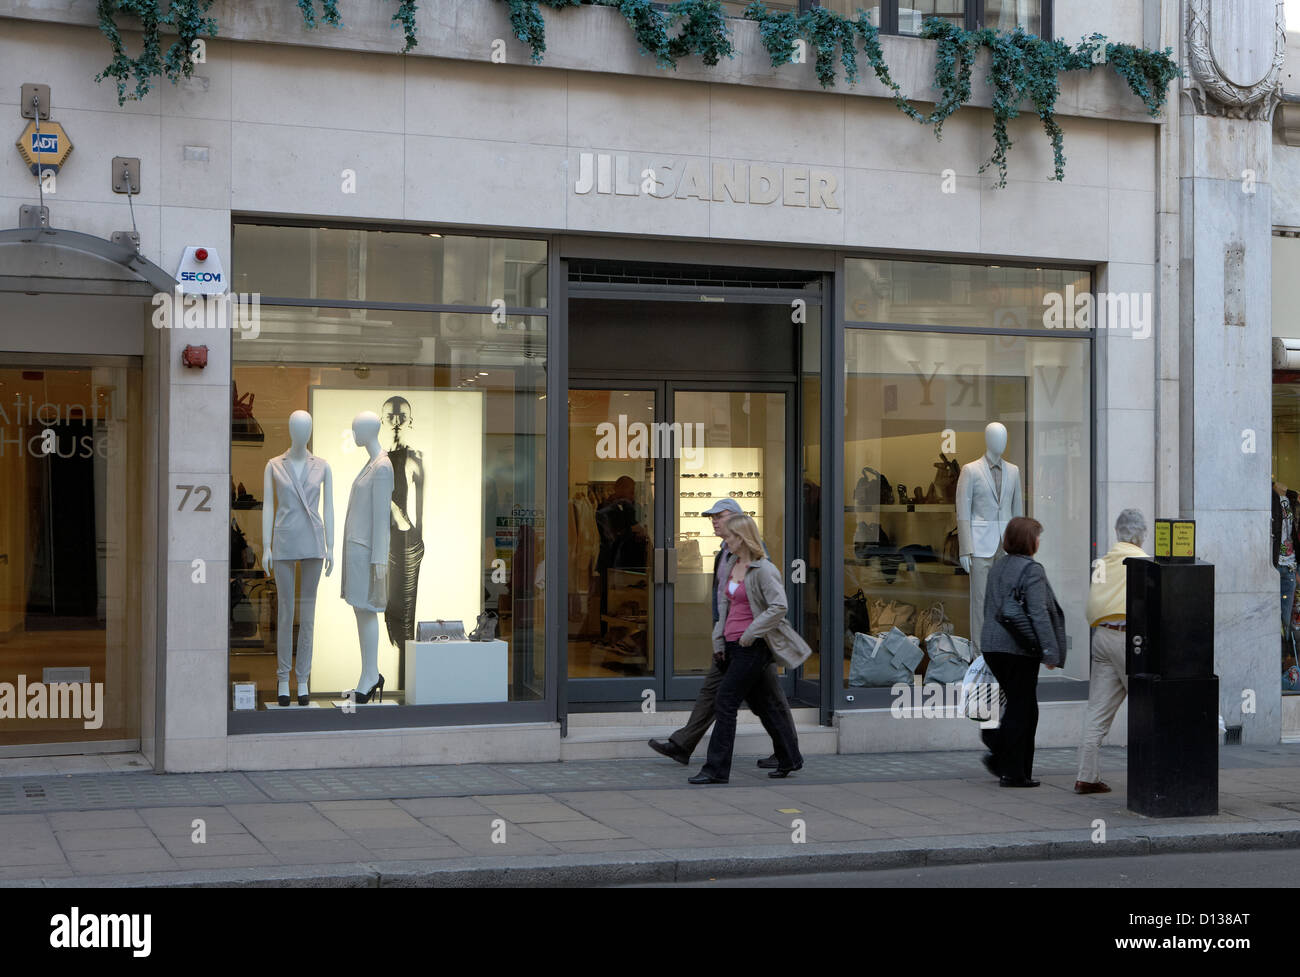 Jil Sander Store High Resolution Stock Photography and Images - Alamy